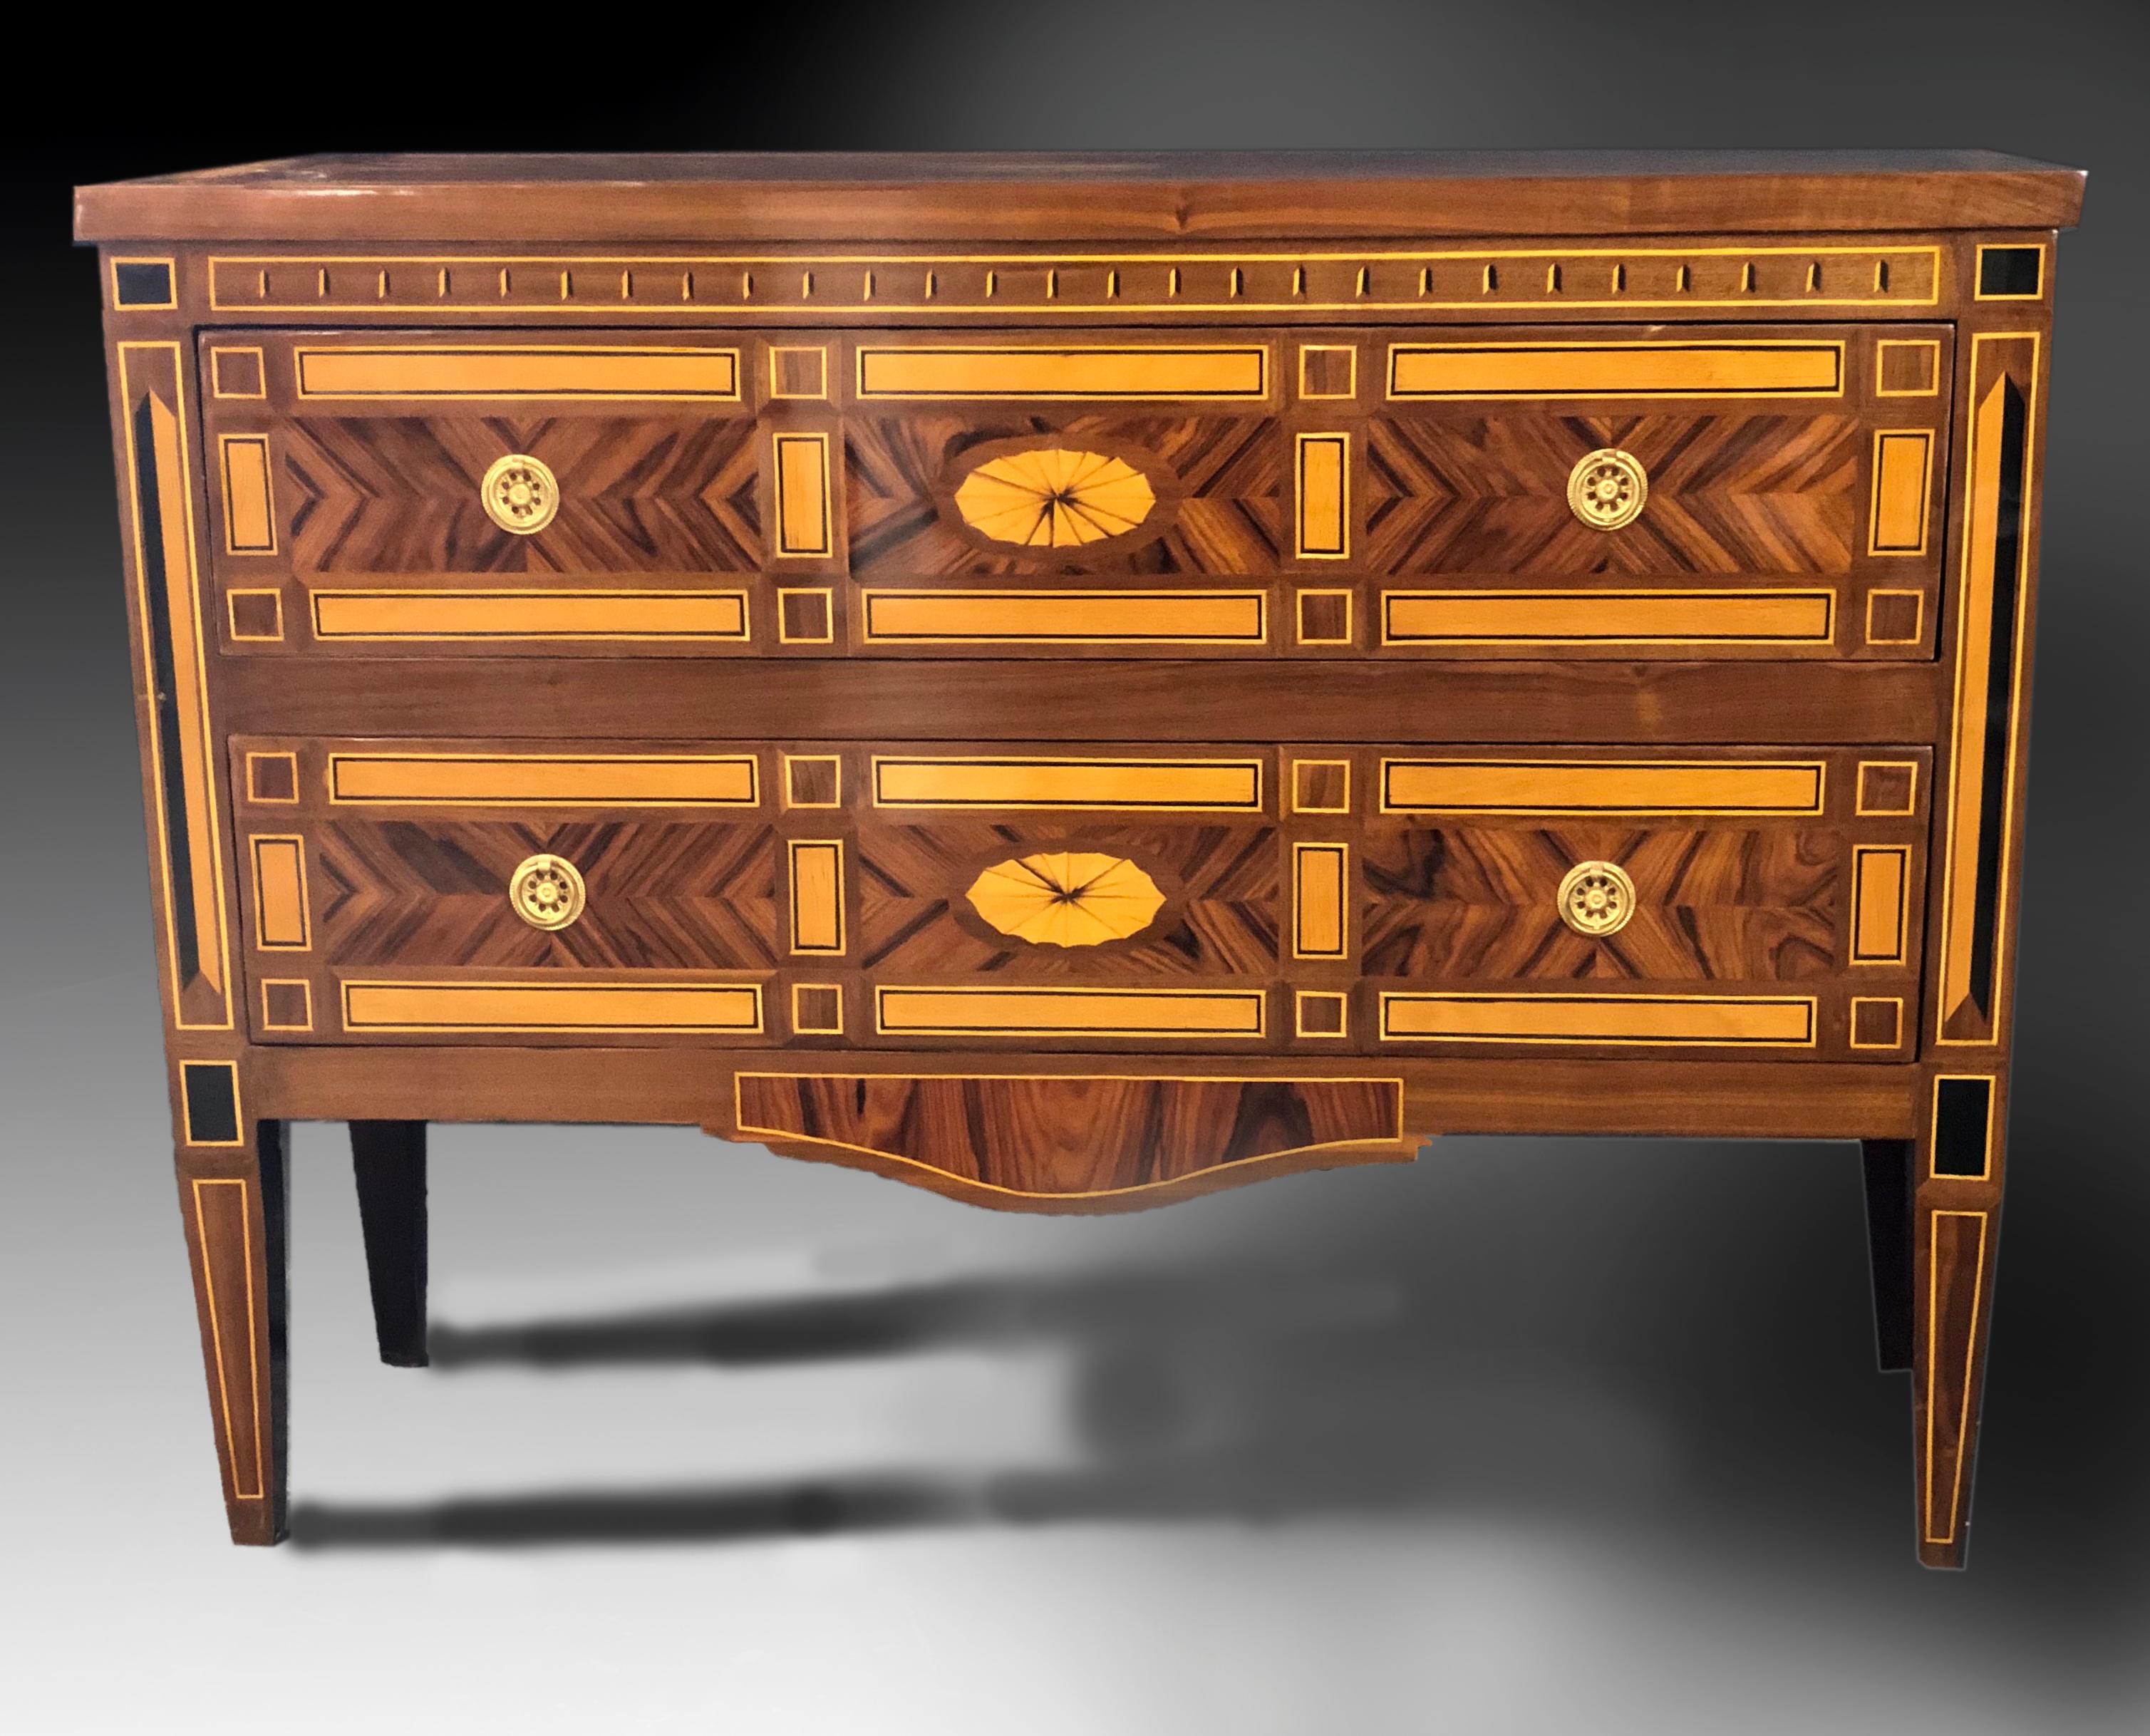 Outstanding 2-drawer parquetry commode that would adorn any entry hall due to its shallow depth and stunning appearance. Profusely veneered with figured Indian rosewood, American walnut and maple as well as African ebony. Masterful workmanship, good